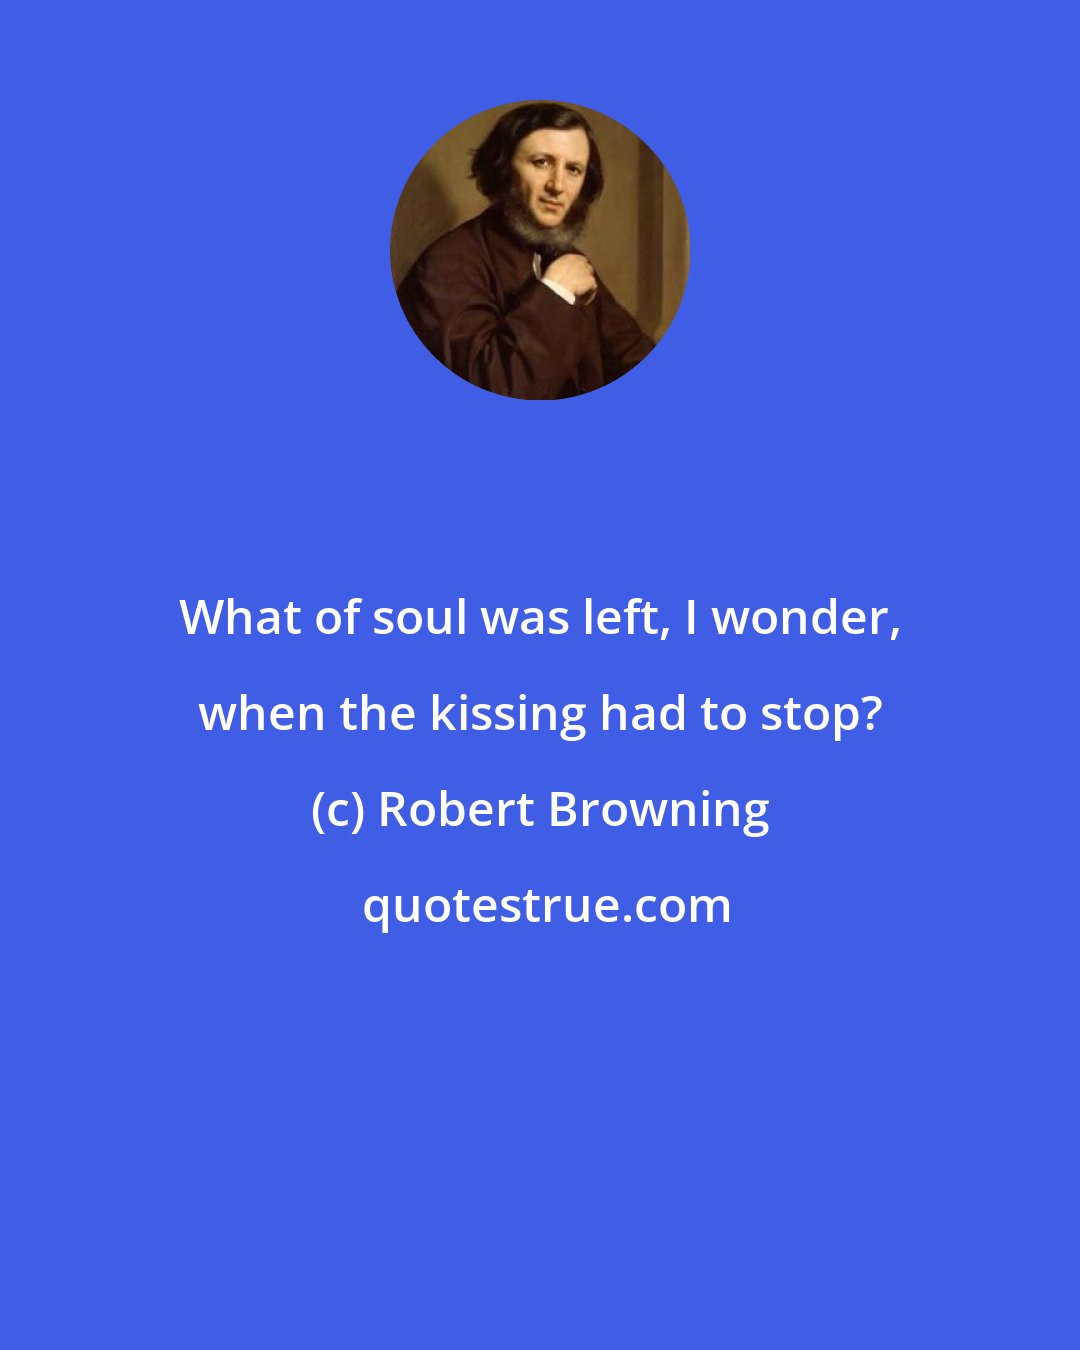 Robert Browning: What of soul was left, I wonder, when the kissing had to stop?